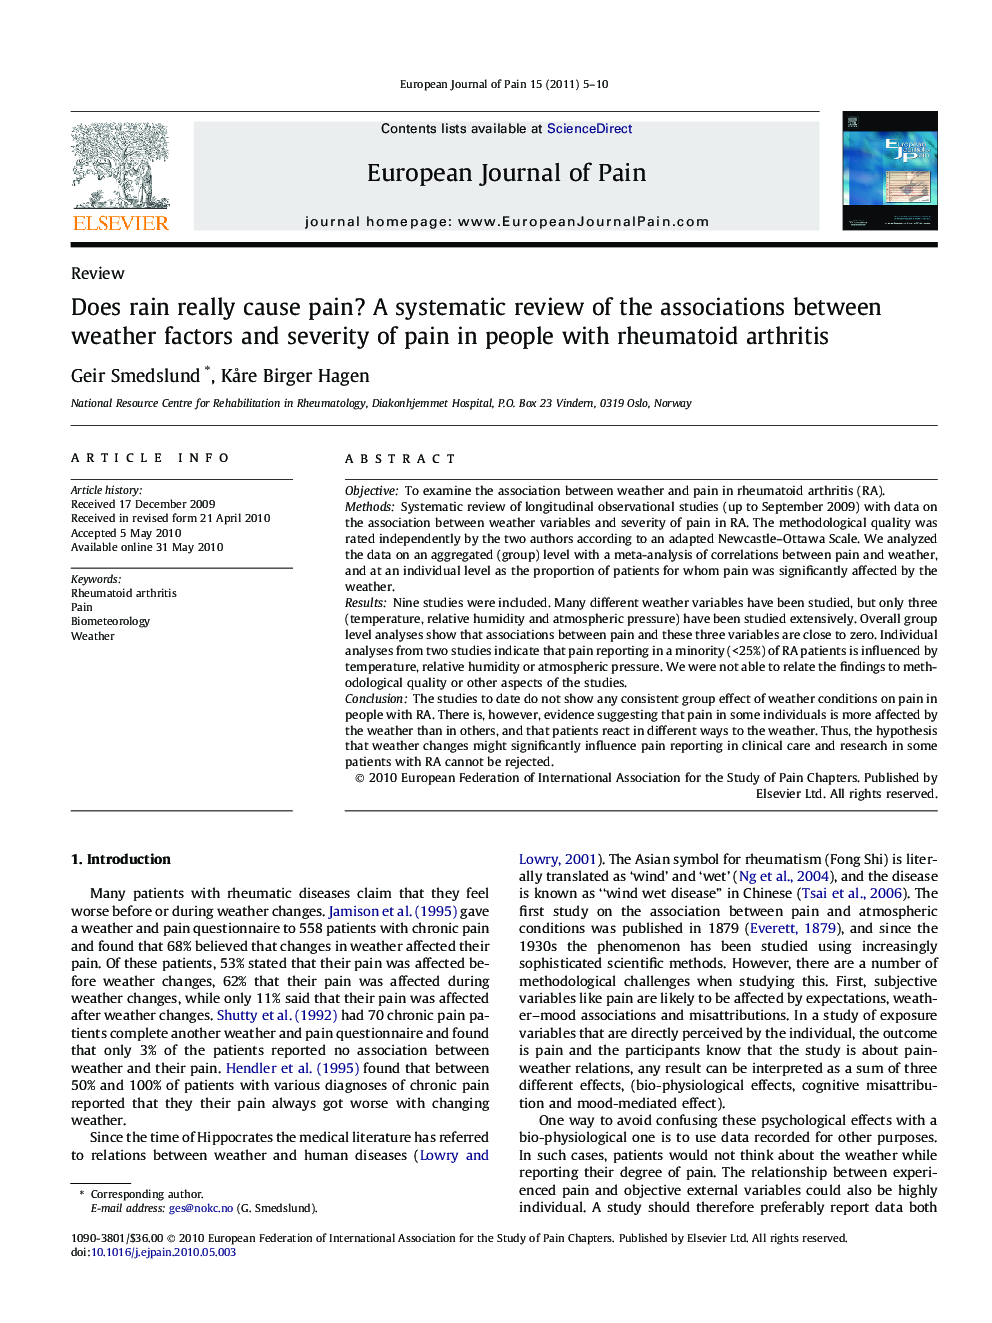 Does rain really cause pain? A systematic review of the associations between weather factors and severity of pain in people with rheumatoid arthritis